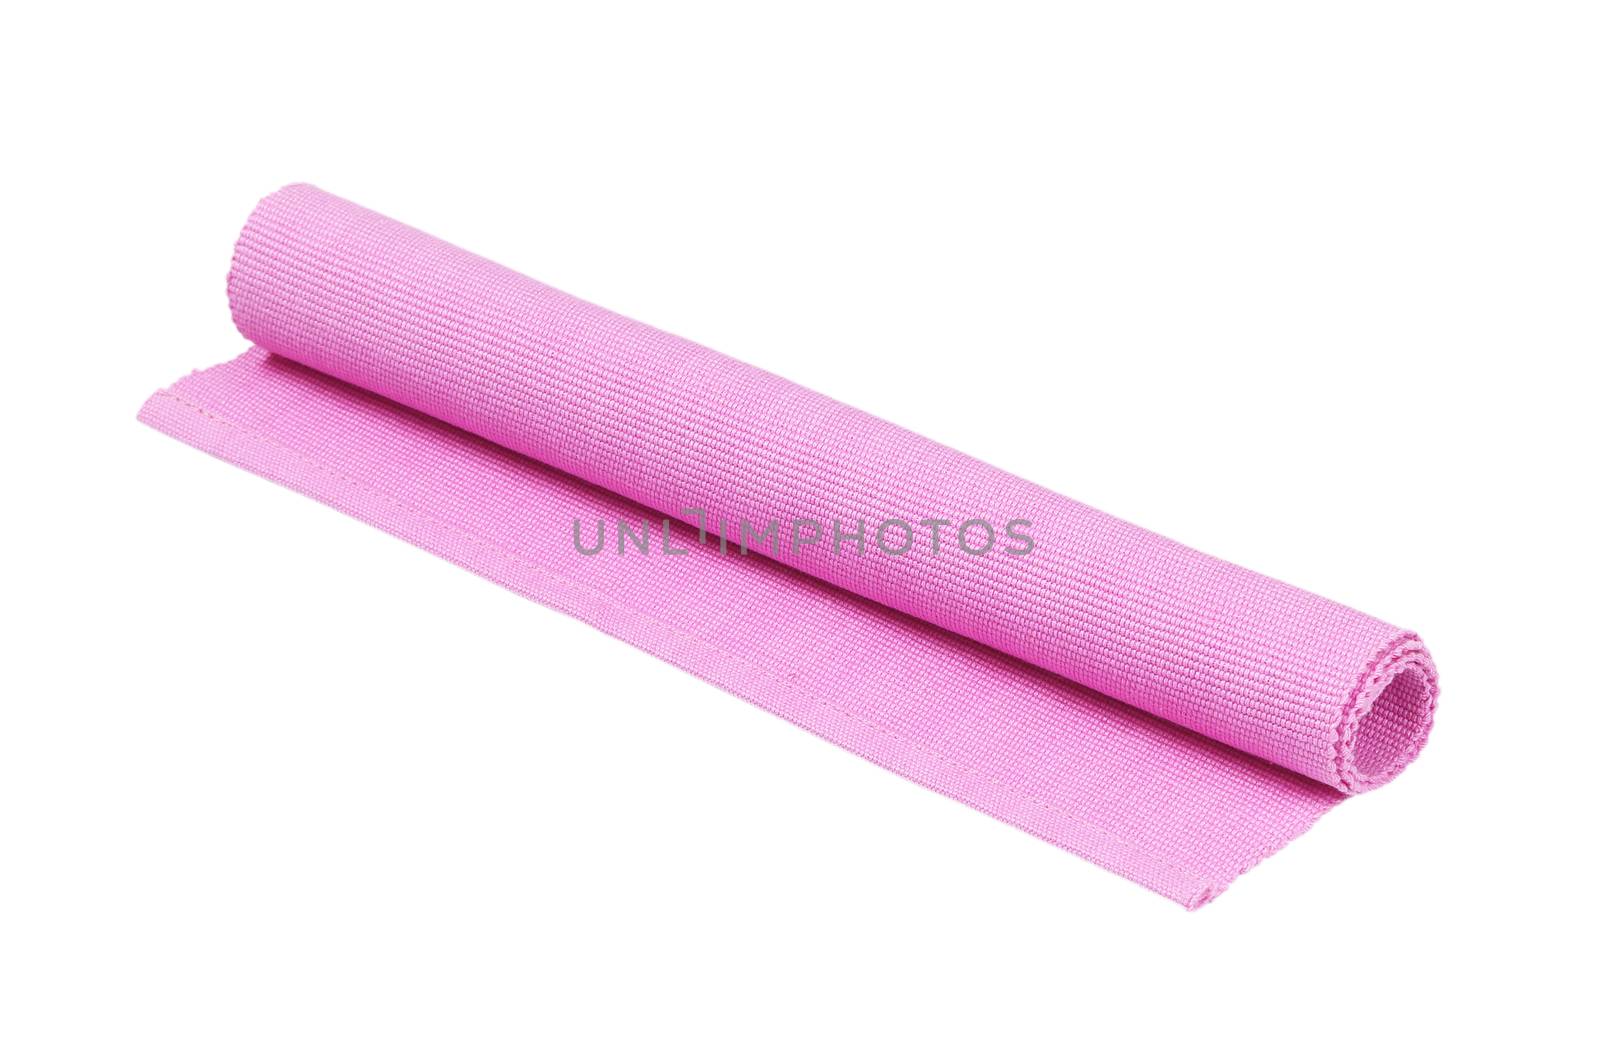 Pink woven cotton placemat isolated on white